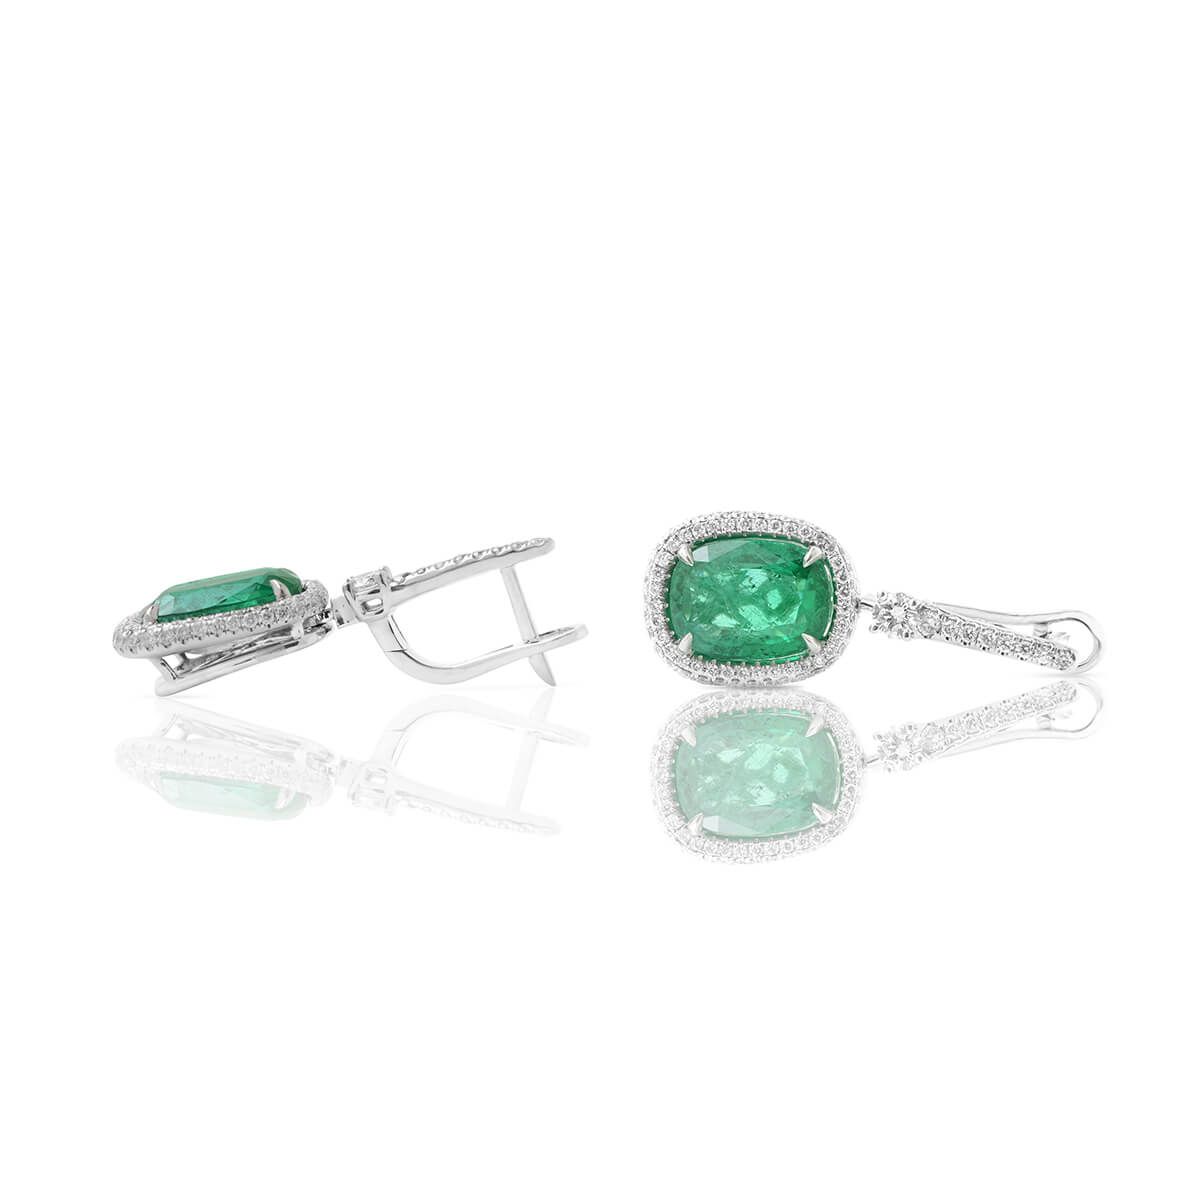 Natural Green Zambia Emerald Earrings, 7.50 Ct. TW, GRS Certified, GRS2016-111476, Unheated